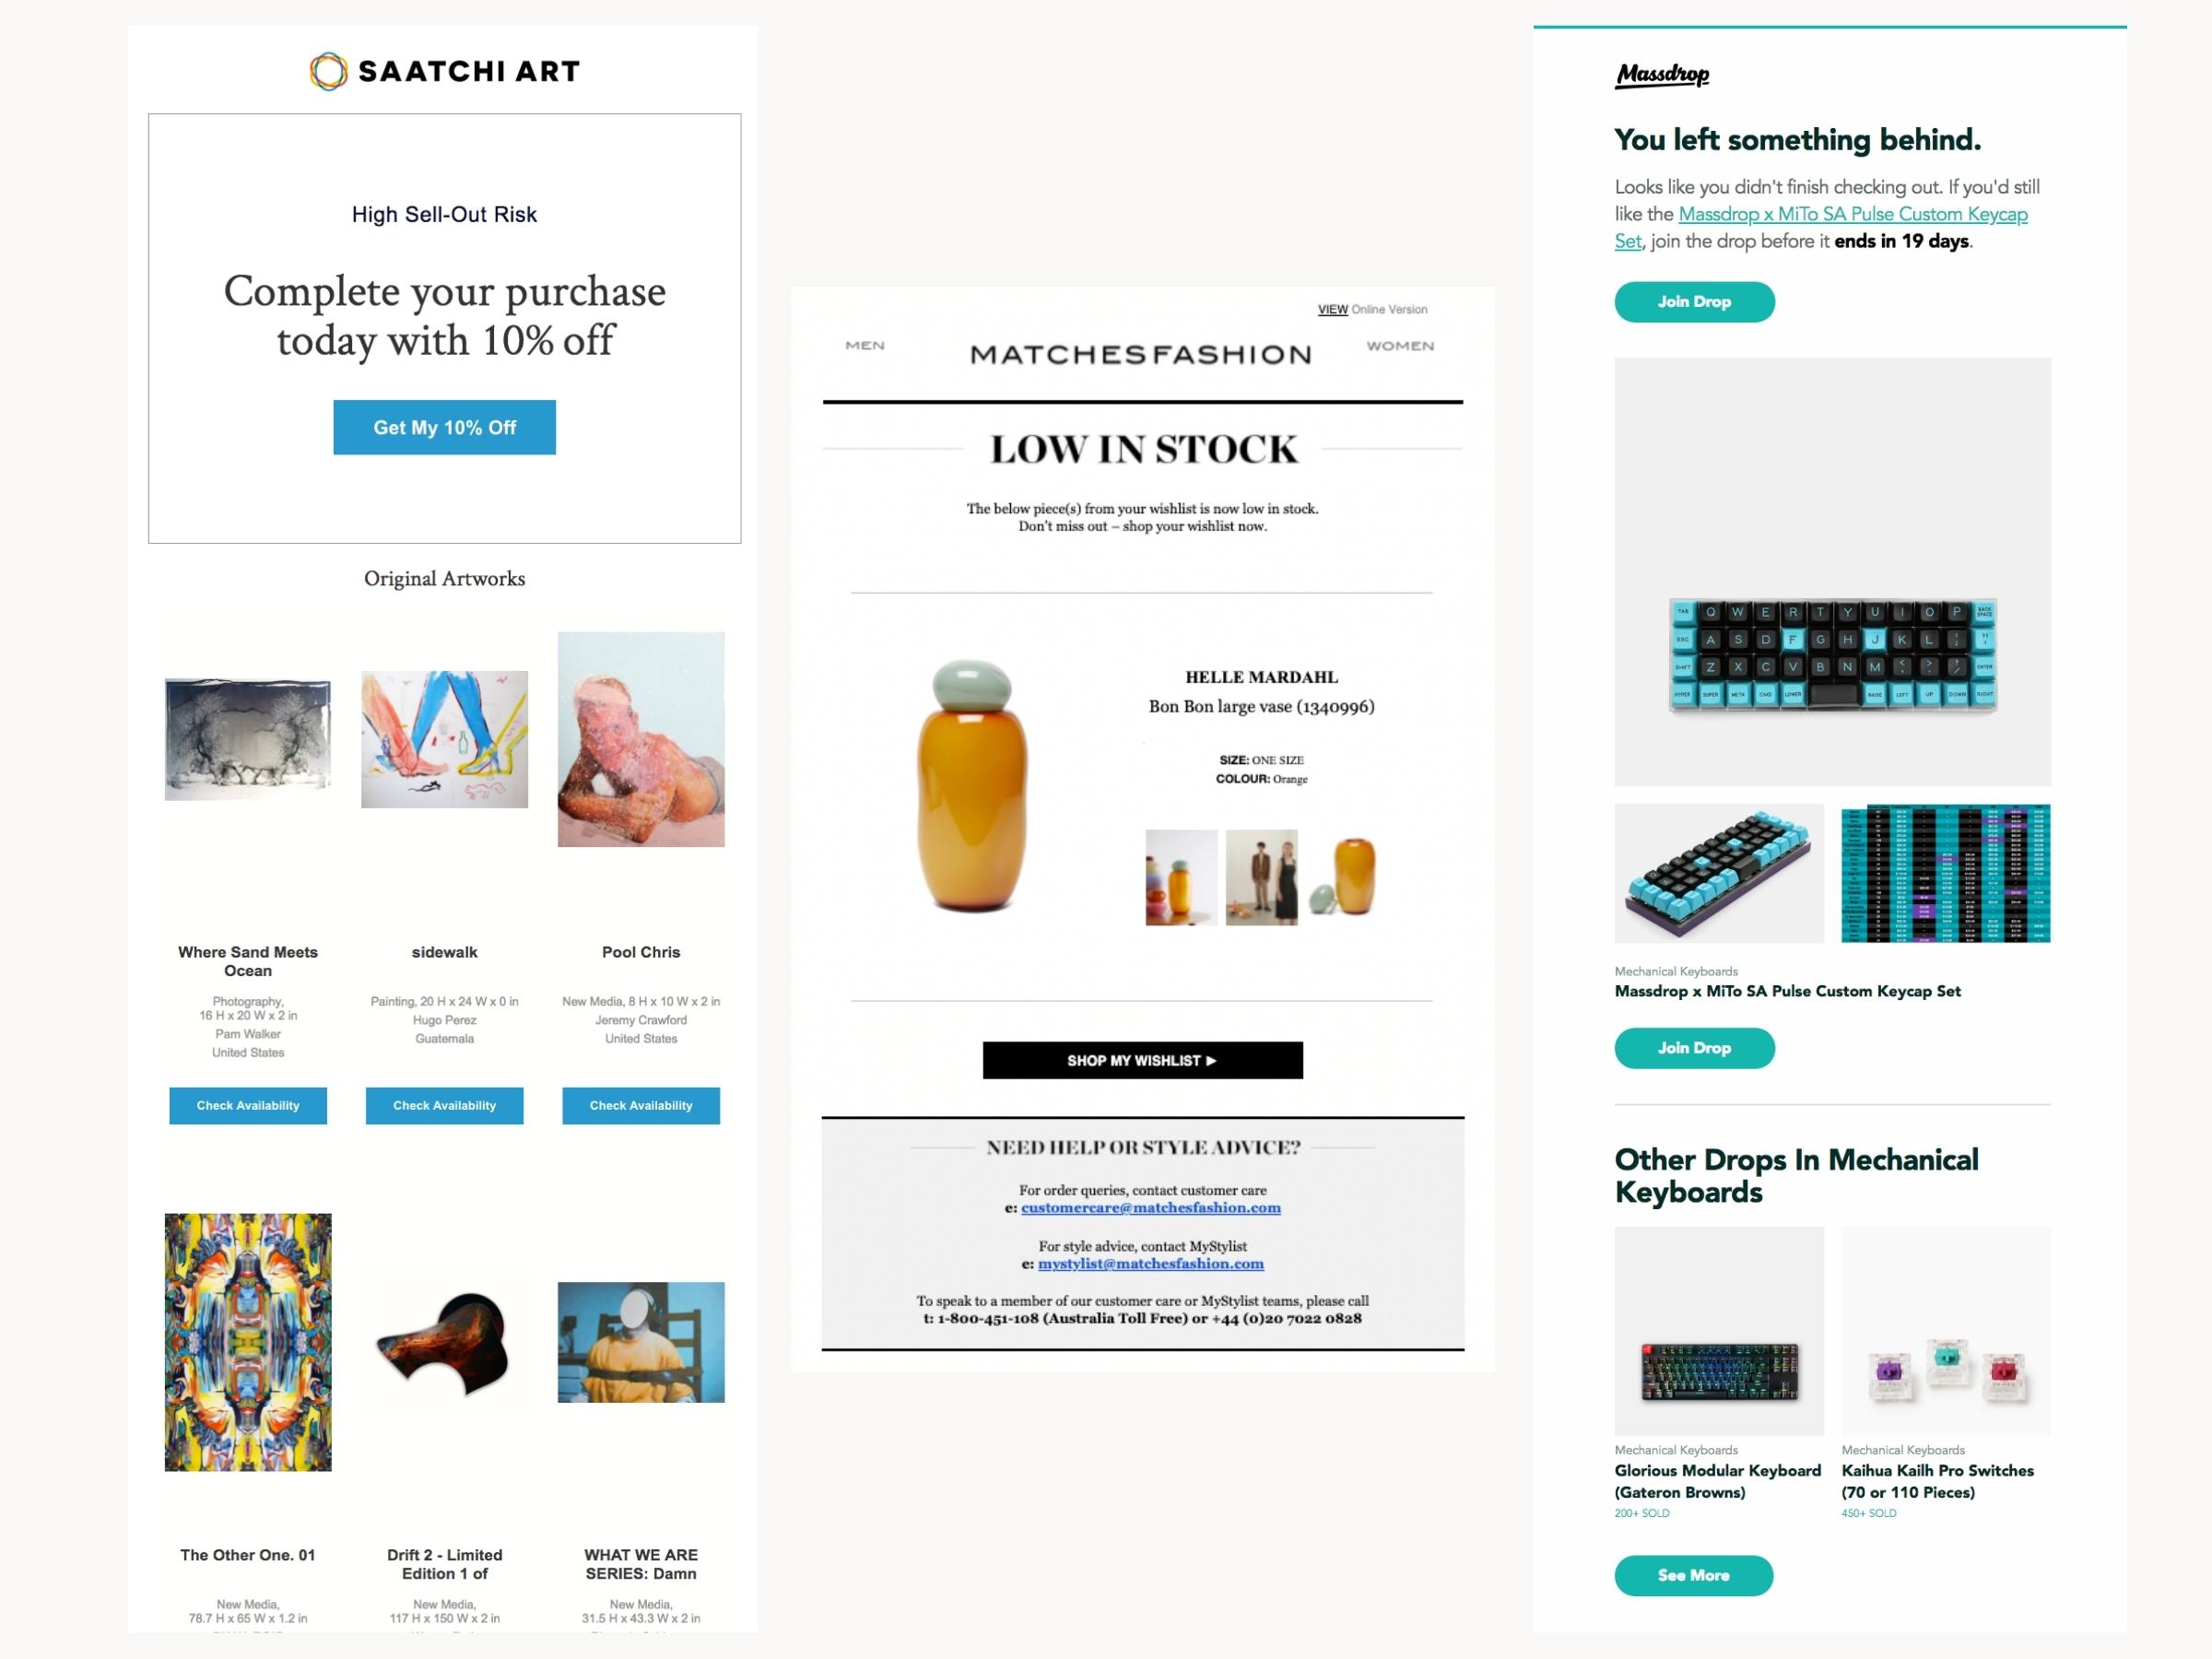 Abandoned cart email examples and 6 ways to reduce them